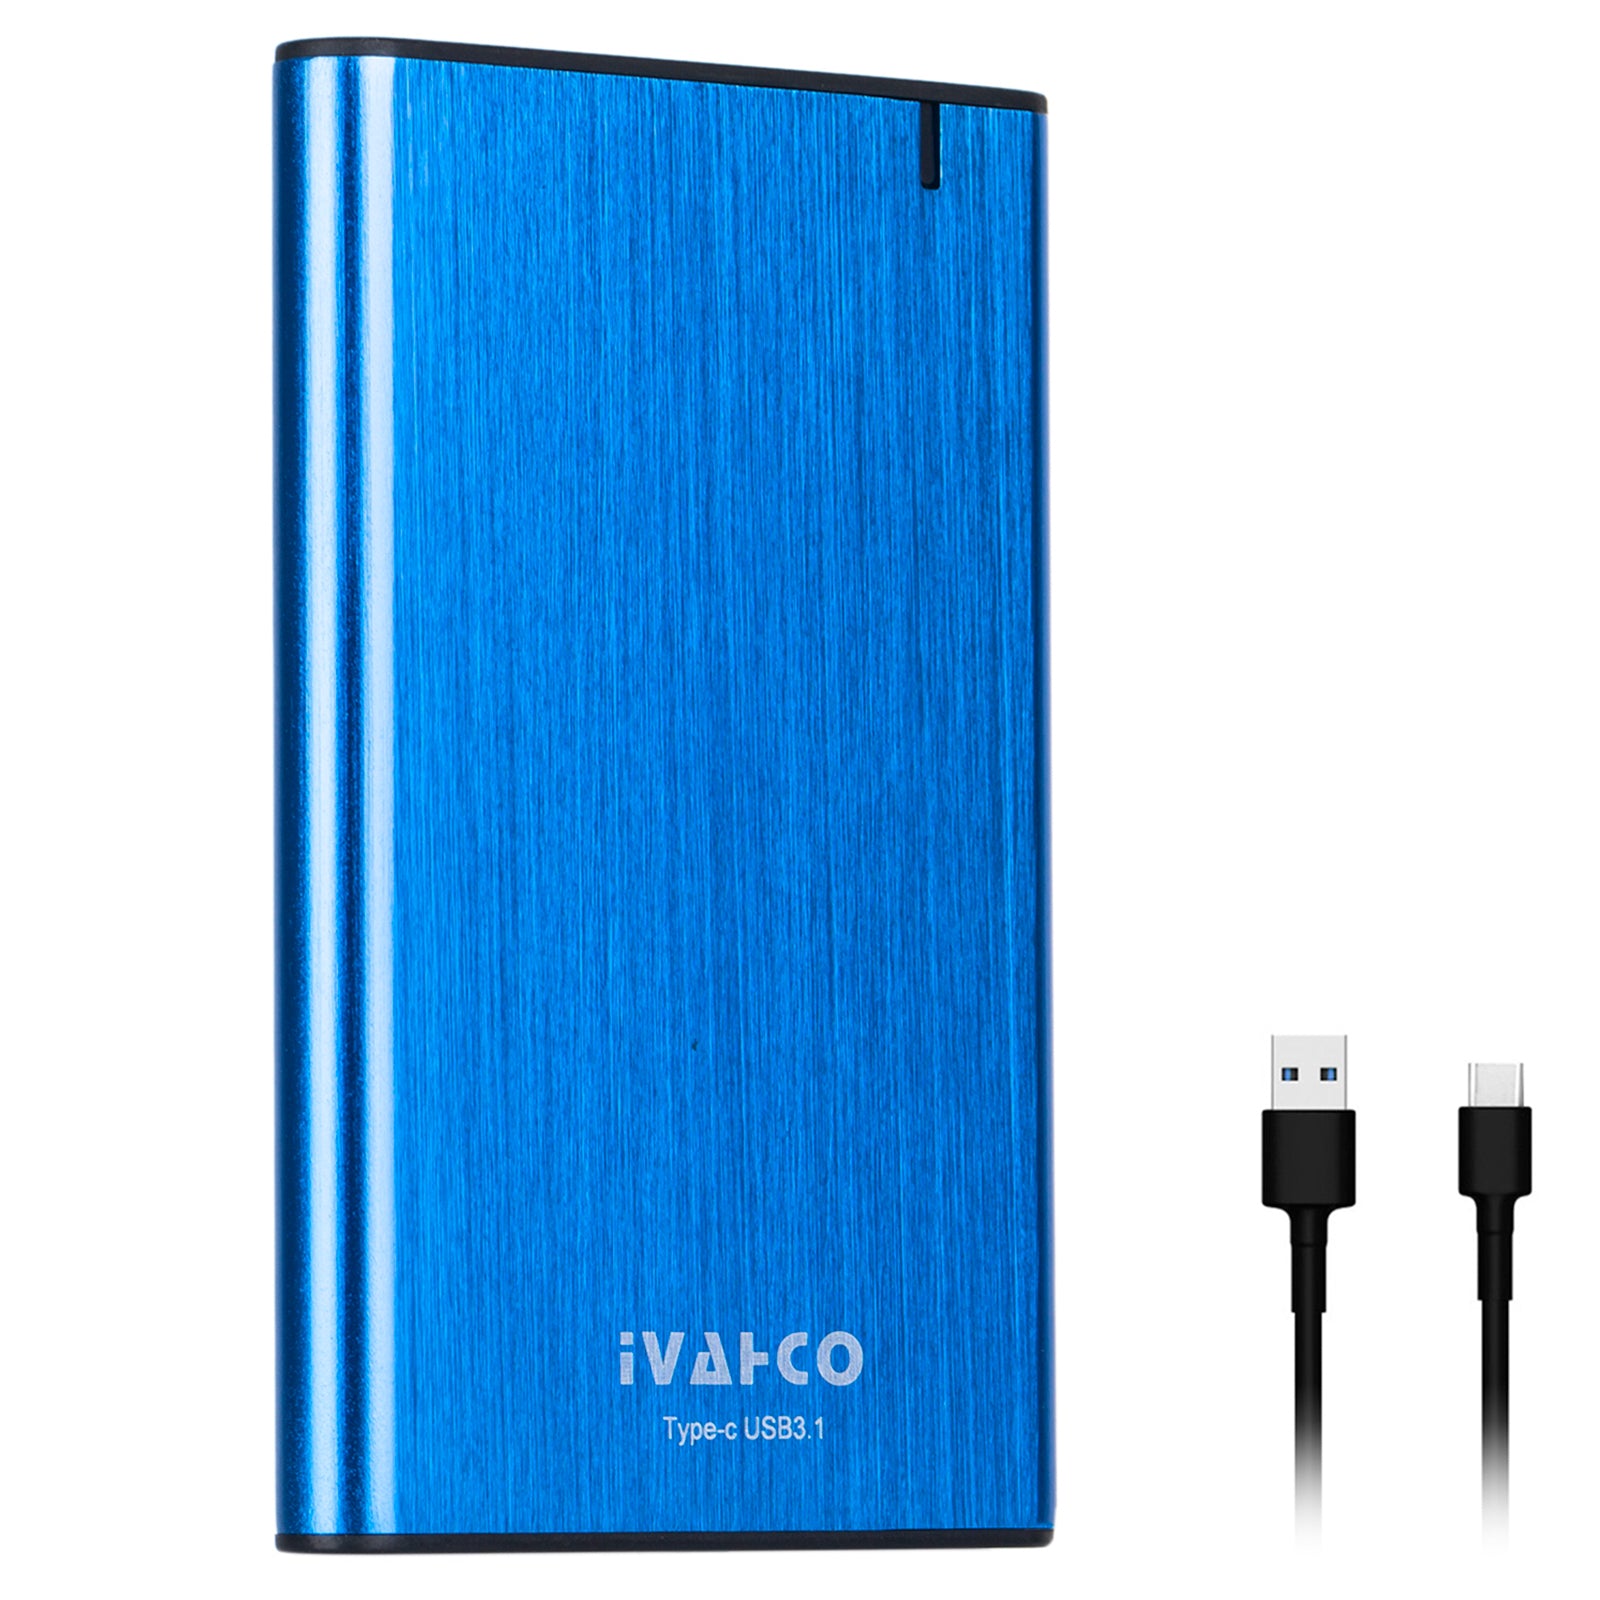 IVAHCO 320GB Type-C USB3.1 Solid State Drive Enclosure Brushed Metal 2.5" HDD External Case - Blue